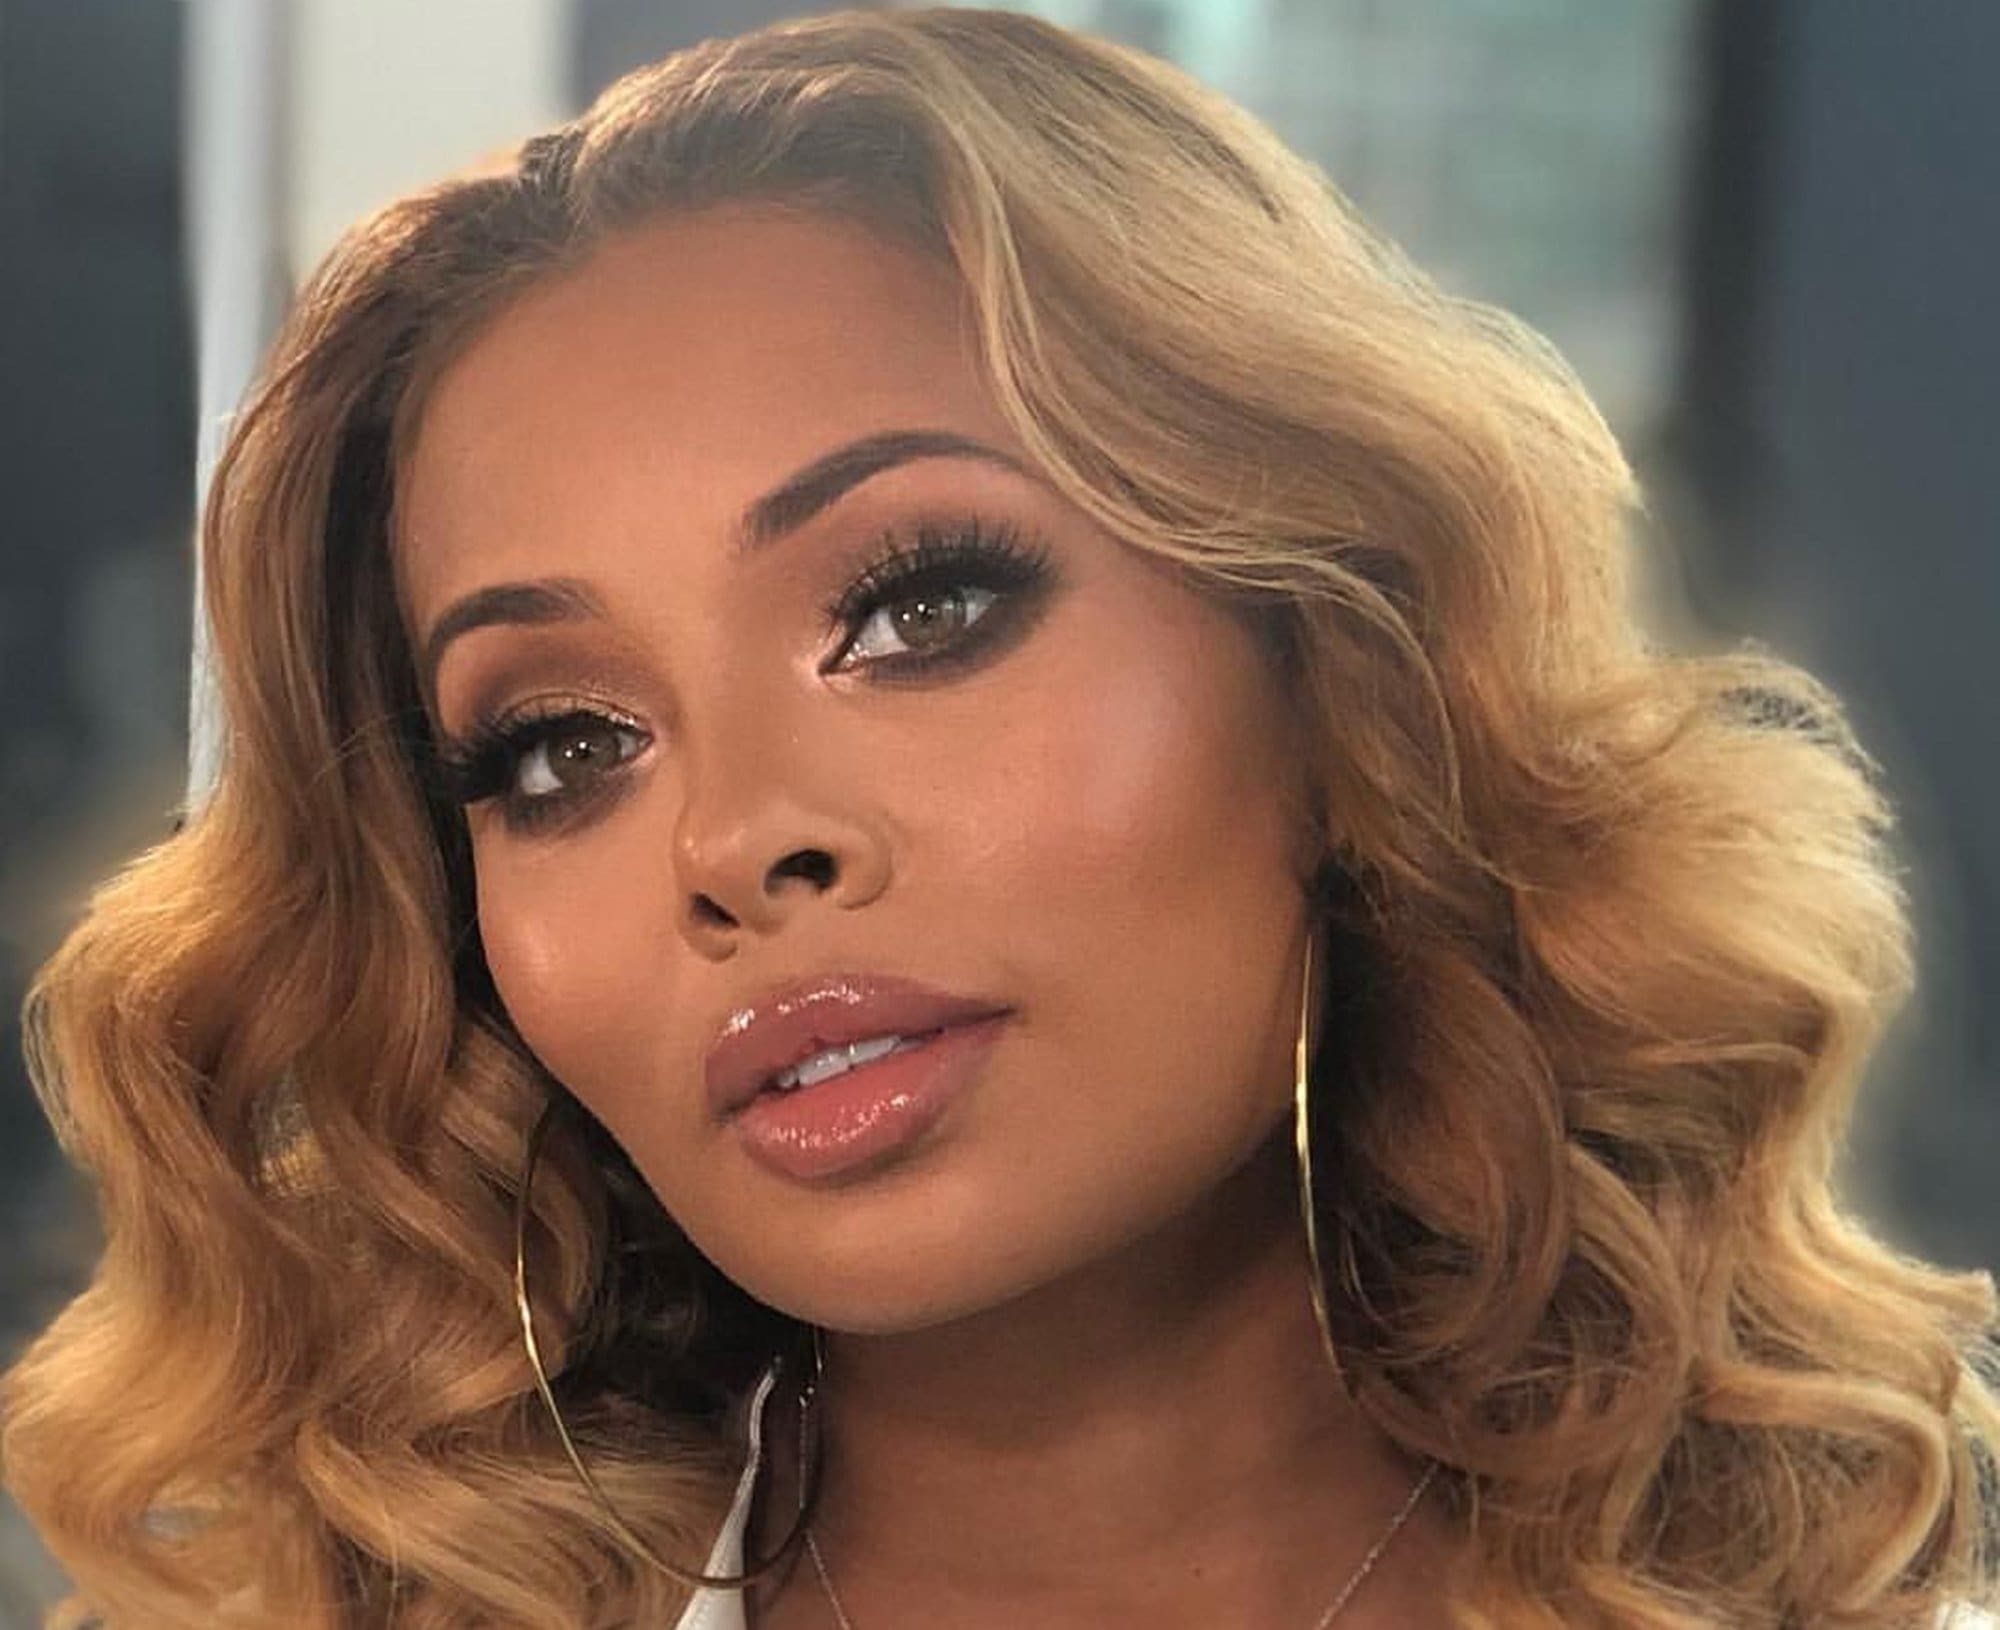 Eva Marcille Celebrates The Inauguration Day - See The Video She Shared